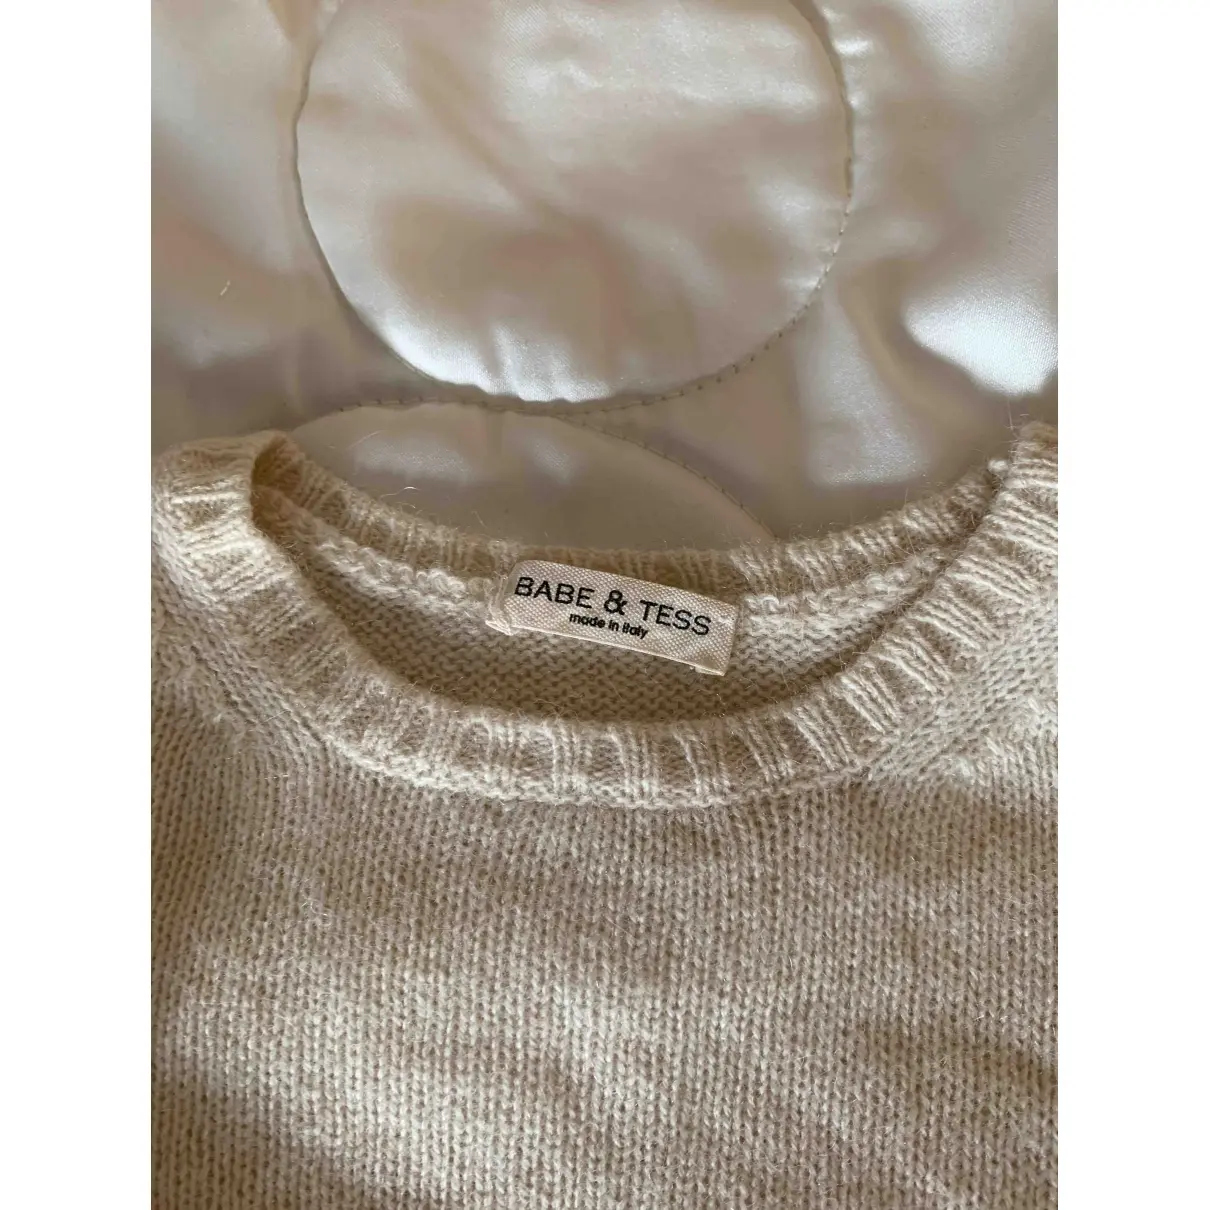 Buy Babe & Tess Cashmere sweater online